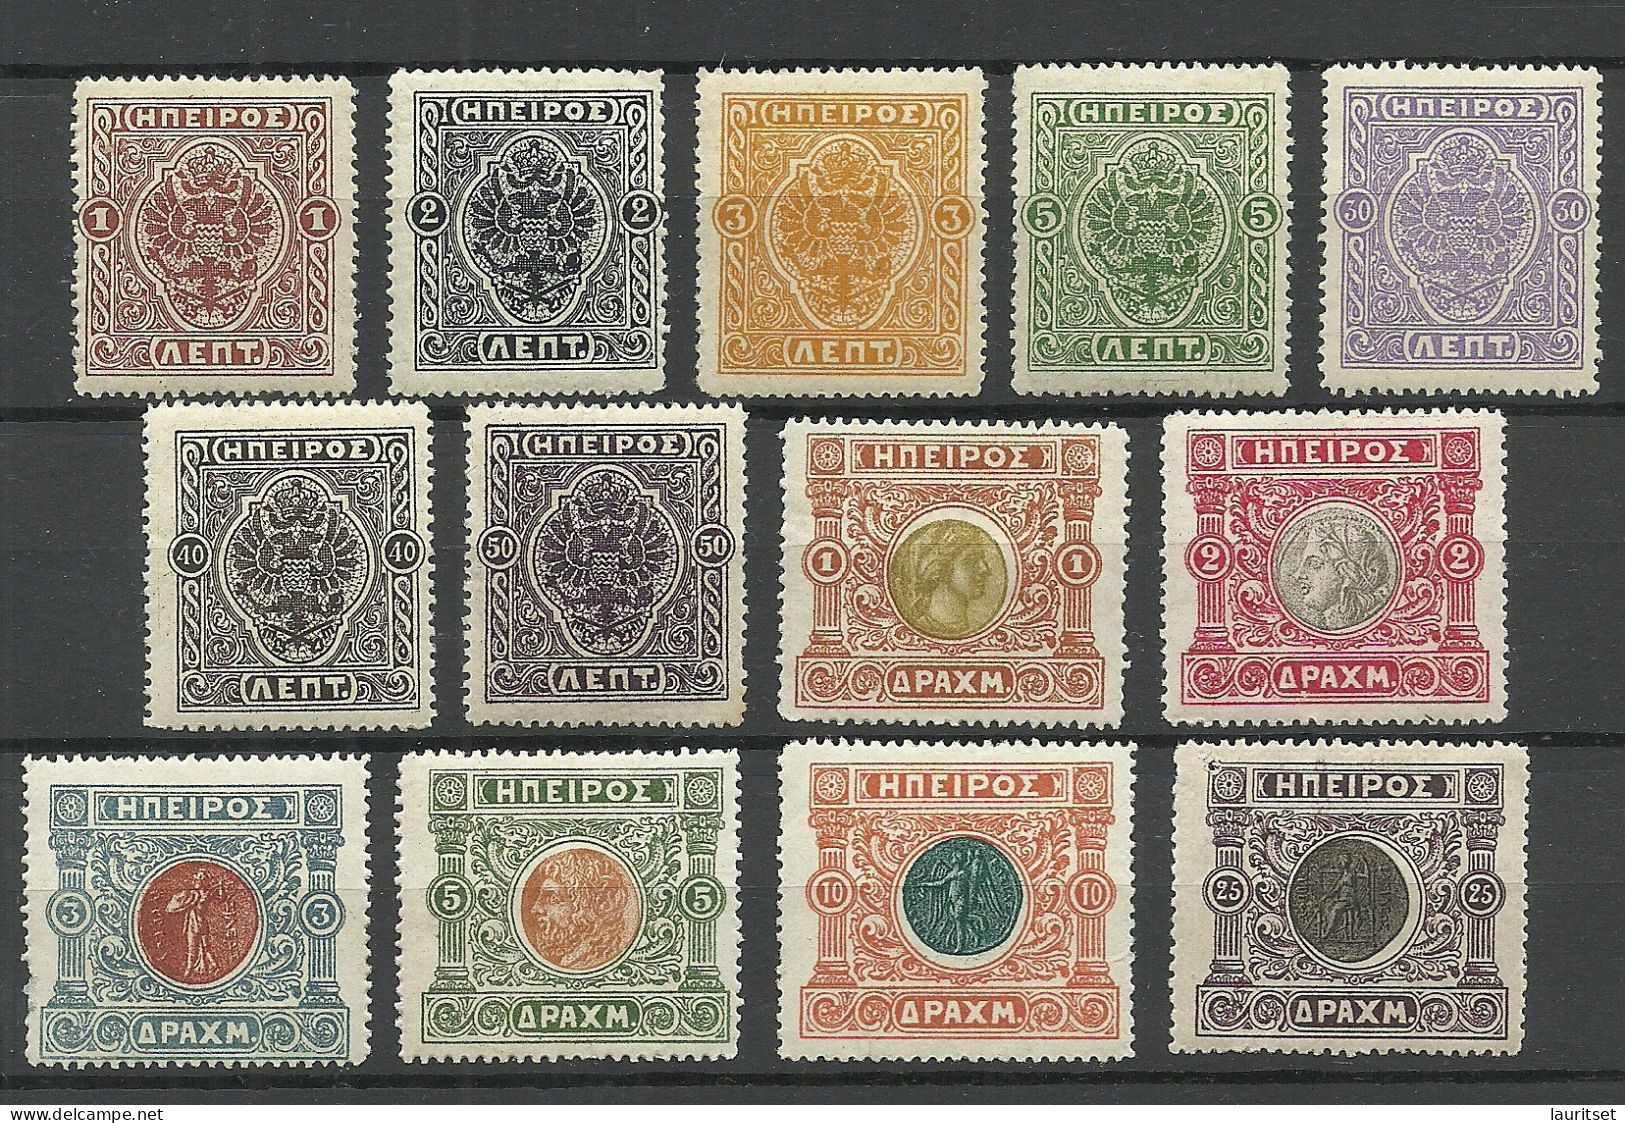 EPIRUS Epeiros Greece 1920 Unofficial Issue MNH (1 Stamp Is MH/*) - Nordepirus